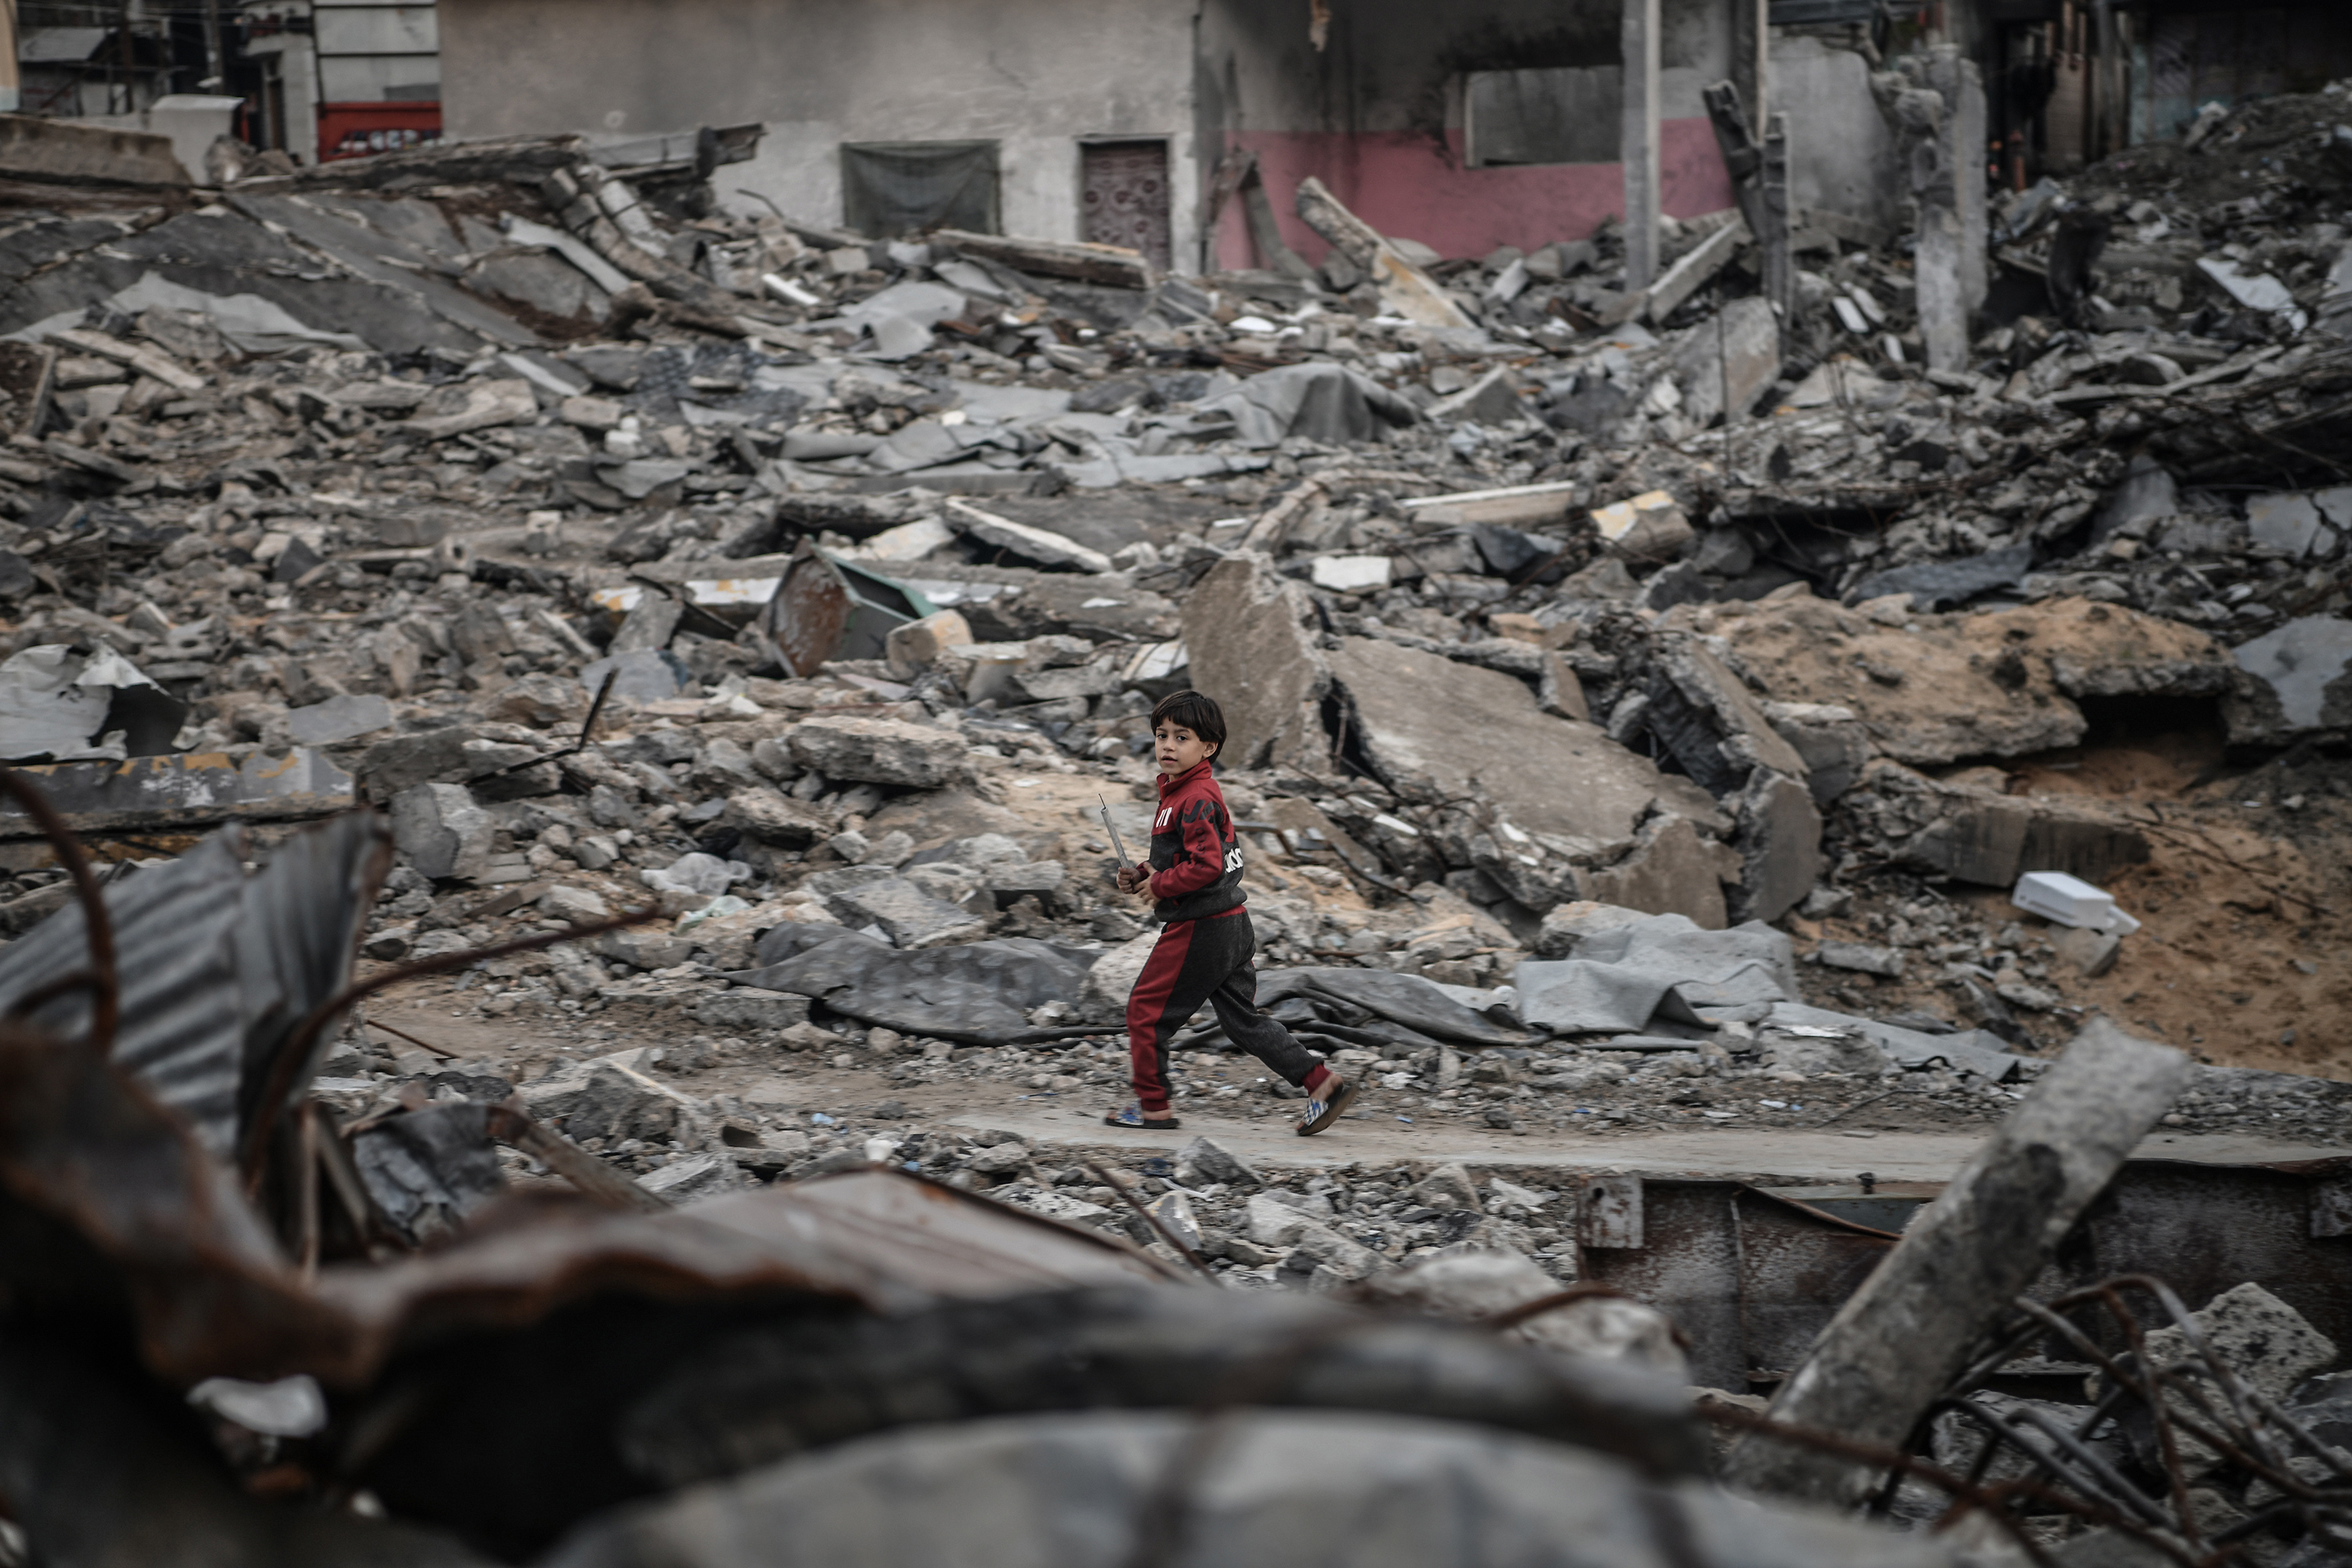 A Palestinian child is seen in the rubble of a building destroyed by an Israeli attack in Rafah, Gaza on January 3.